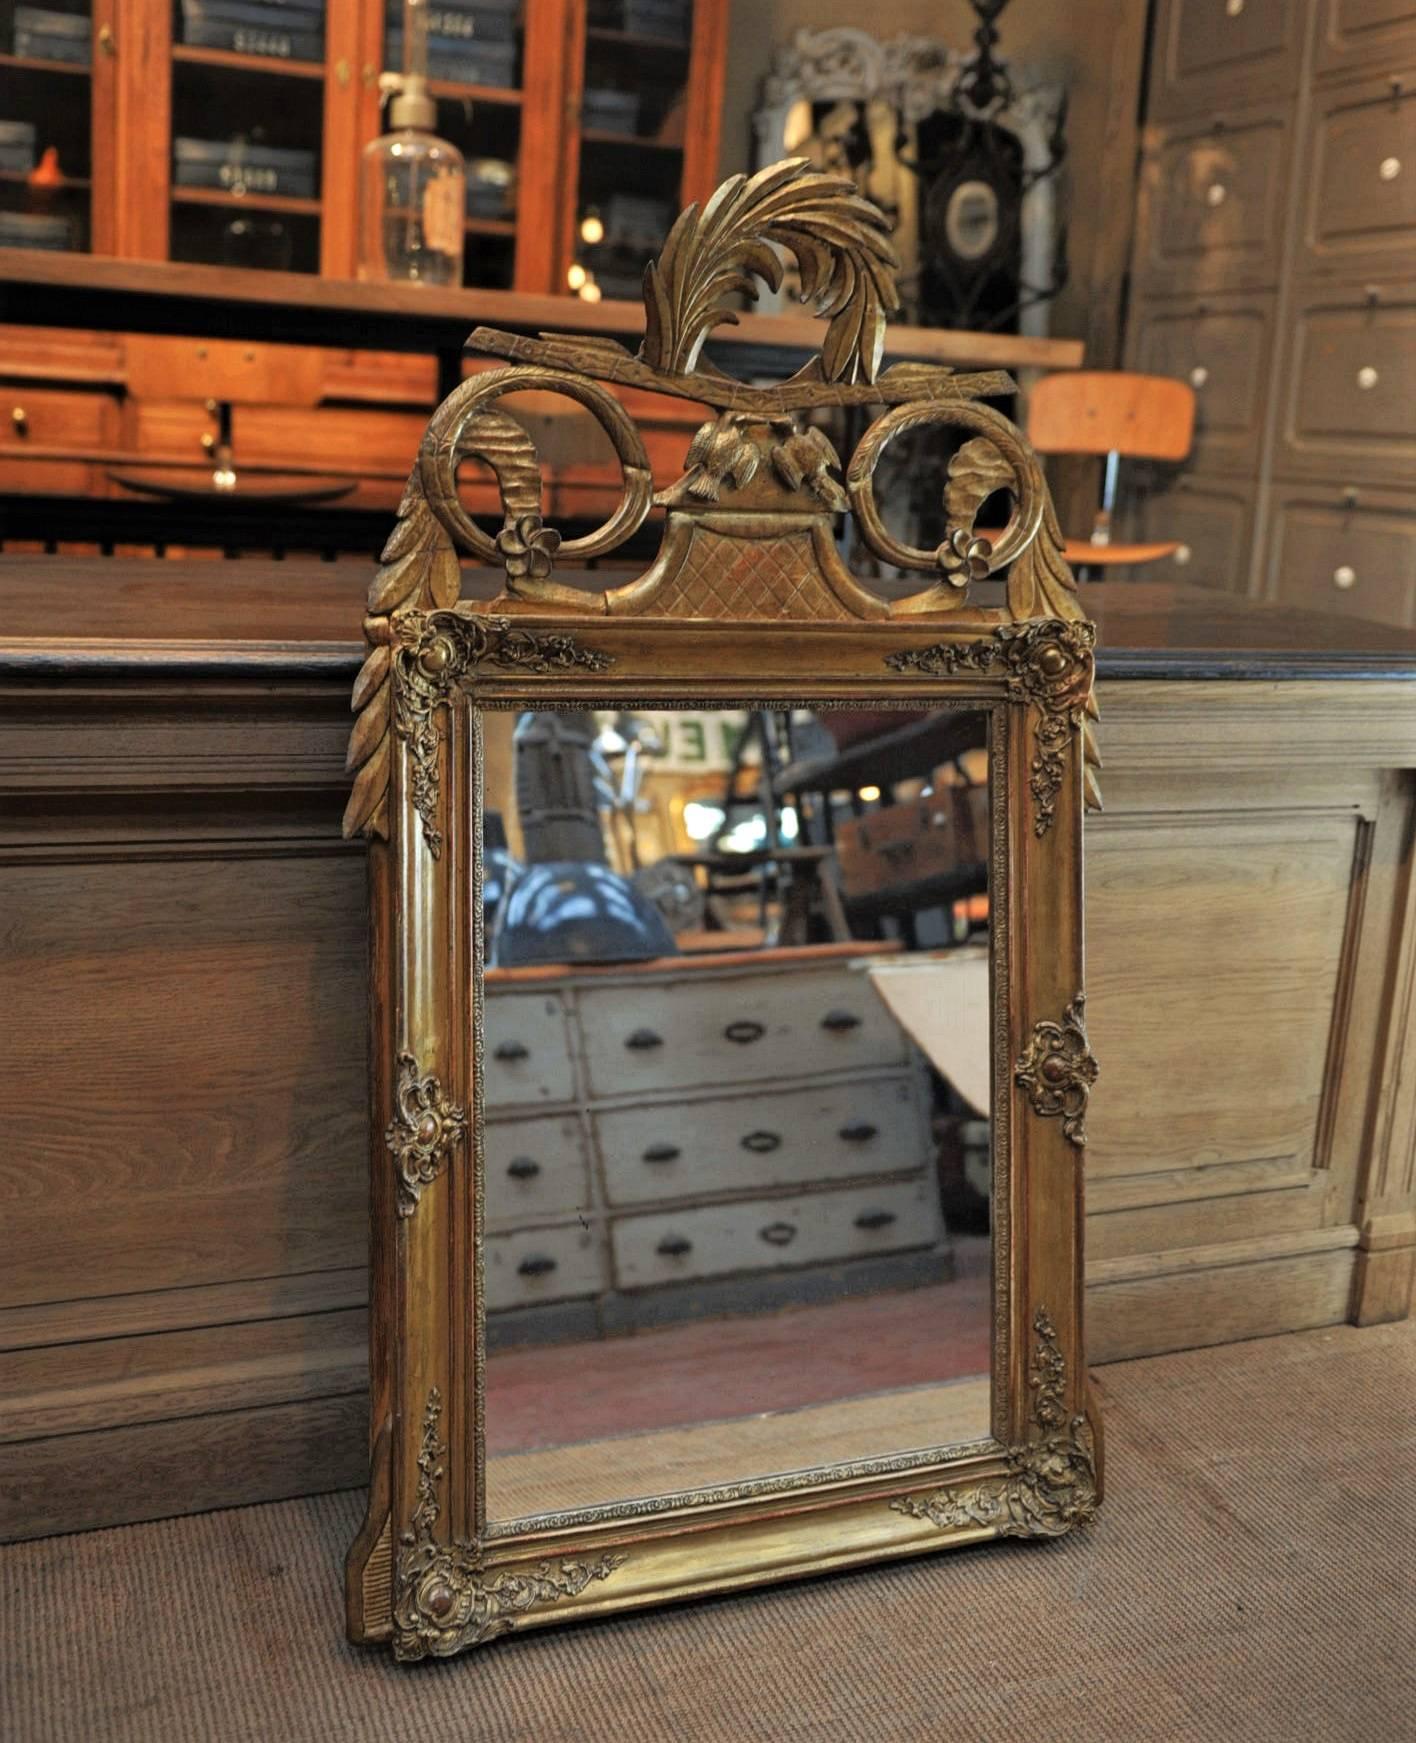 19th century French mirror, gilded wood frame with great birds and leaves decor the antique original gilt and mirror glass in very good condition.

 